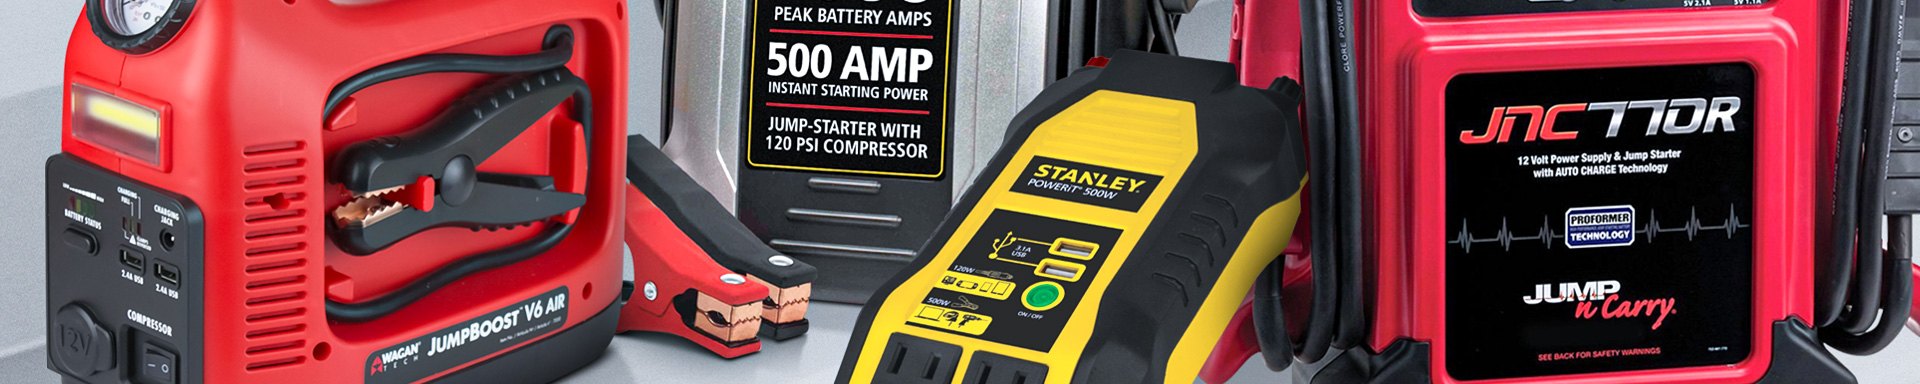 Dorman Battery Chargers & Jump Starters